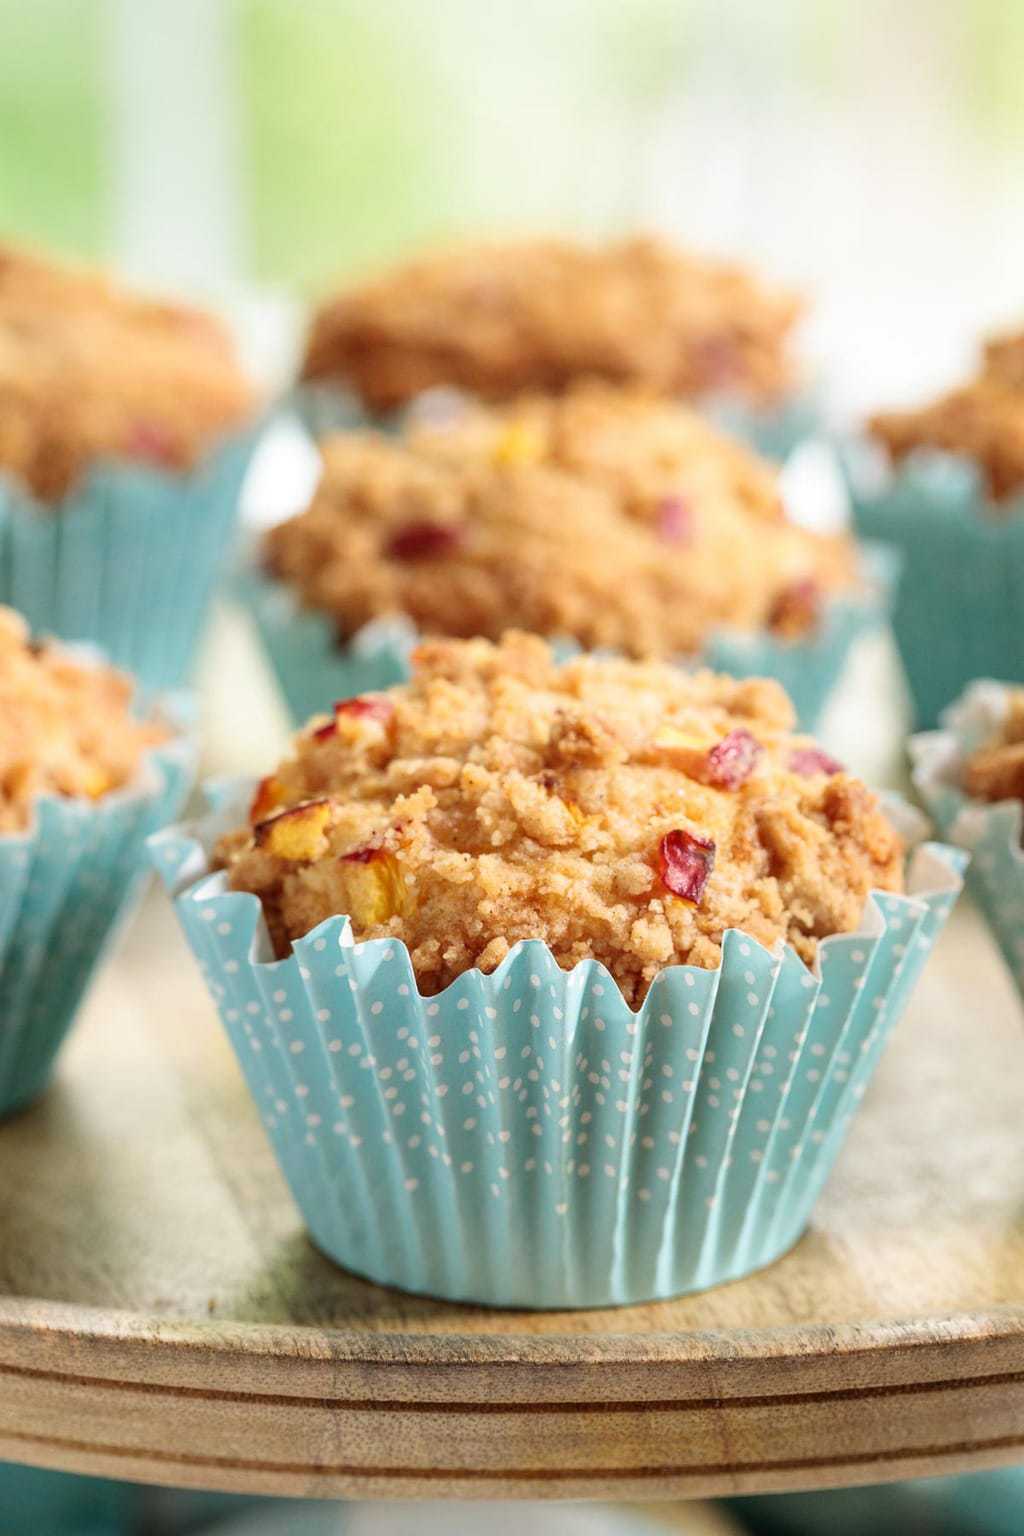 Vertical closeup photo of Peach Crumble Muffins in turquoise muffin liners on a wood pedestal serving plate.